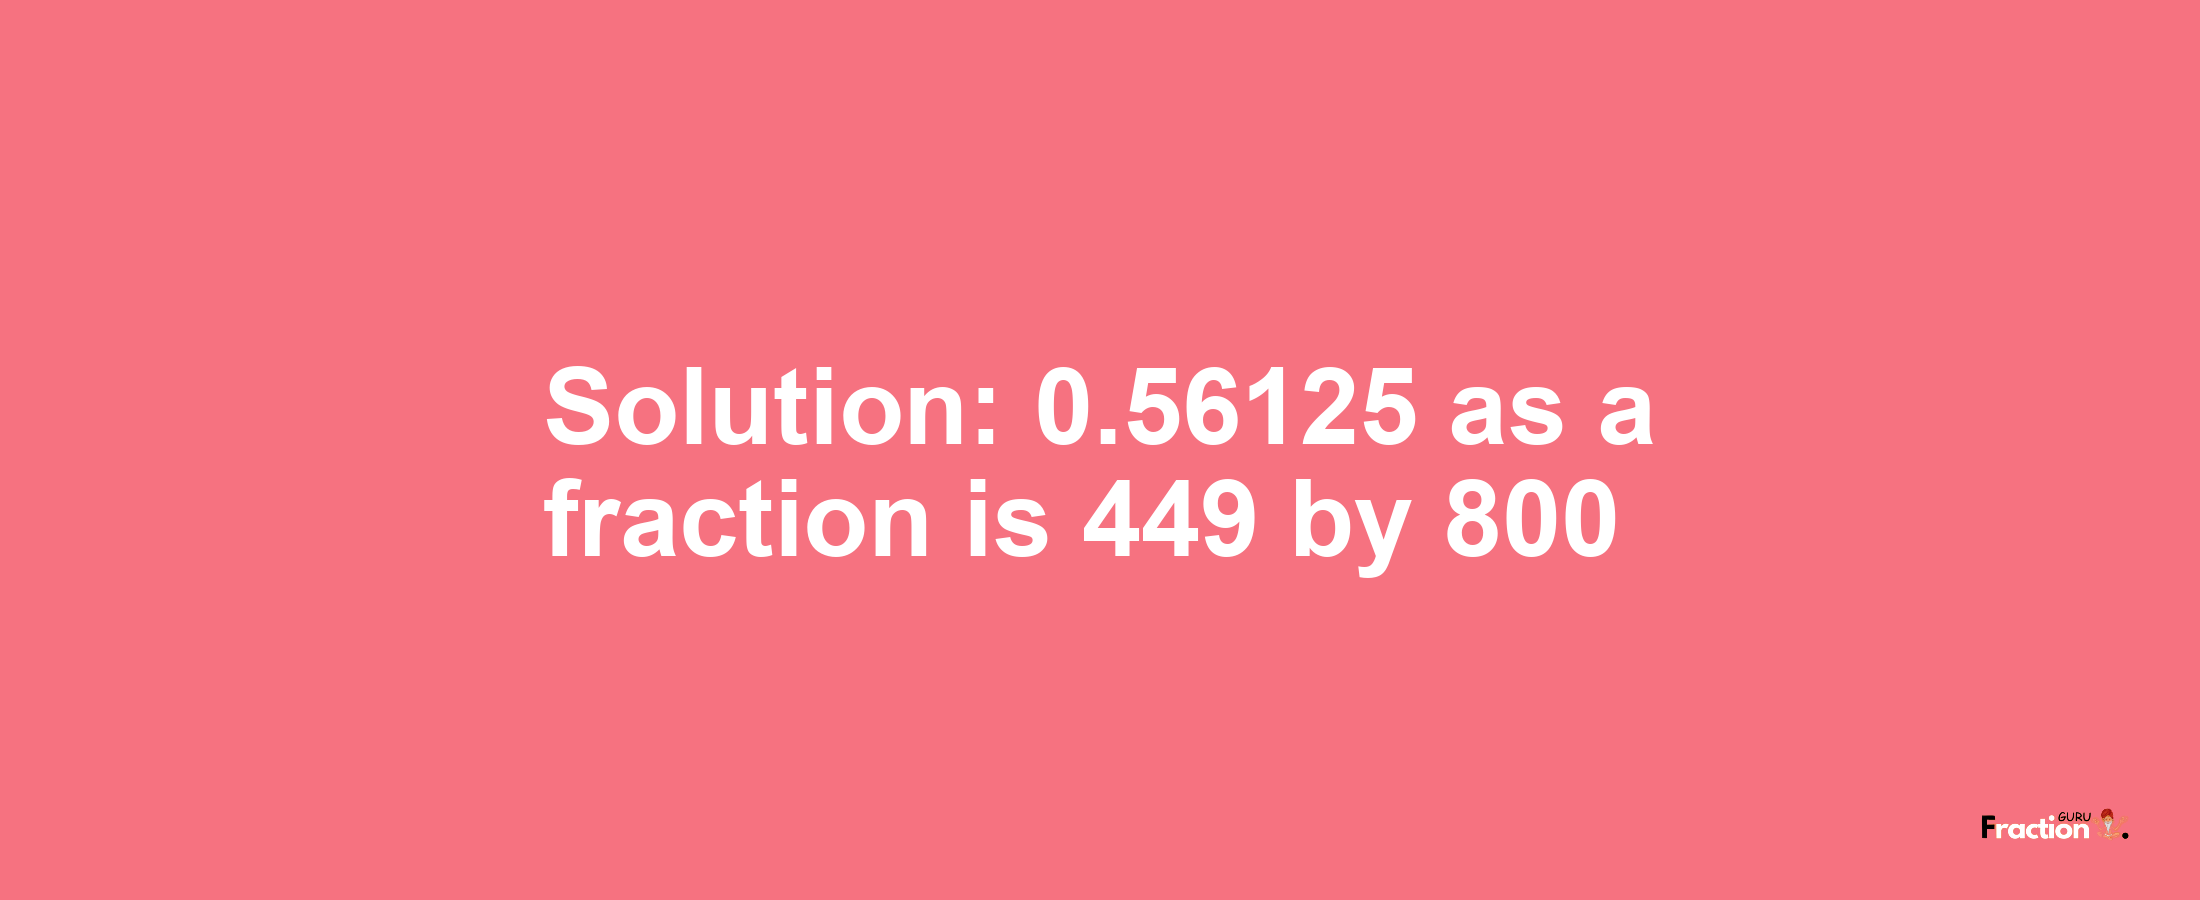 Solution:0.56125 as a fraction is 449/800